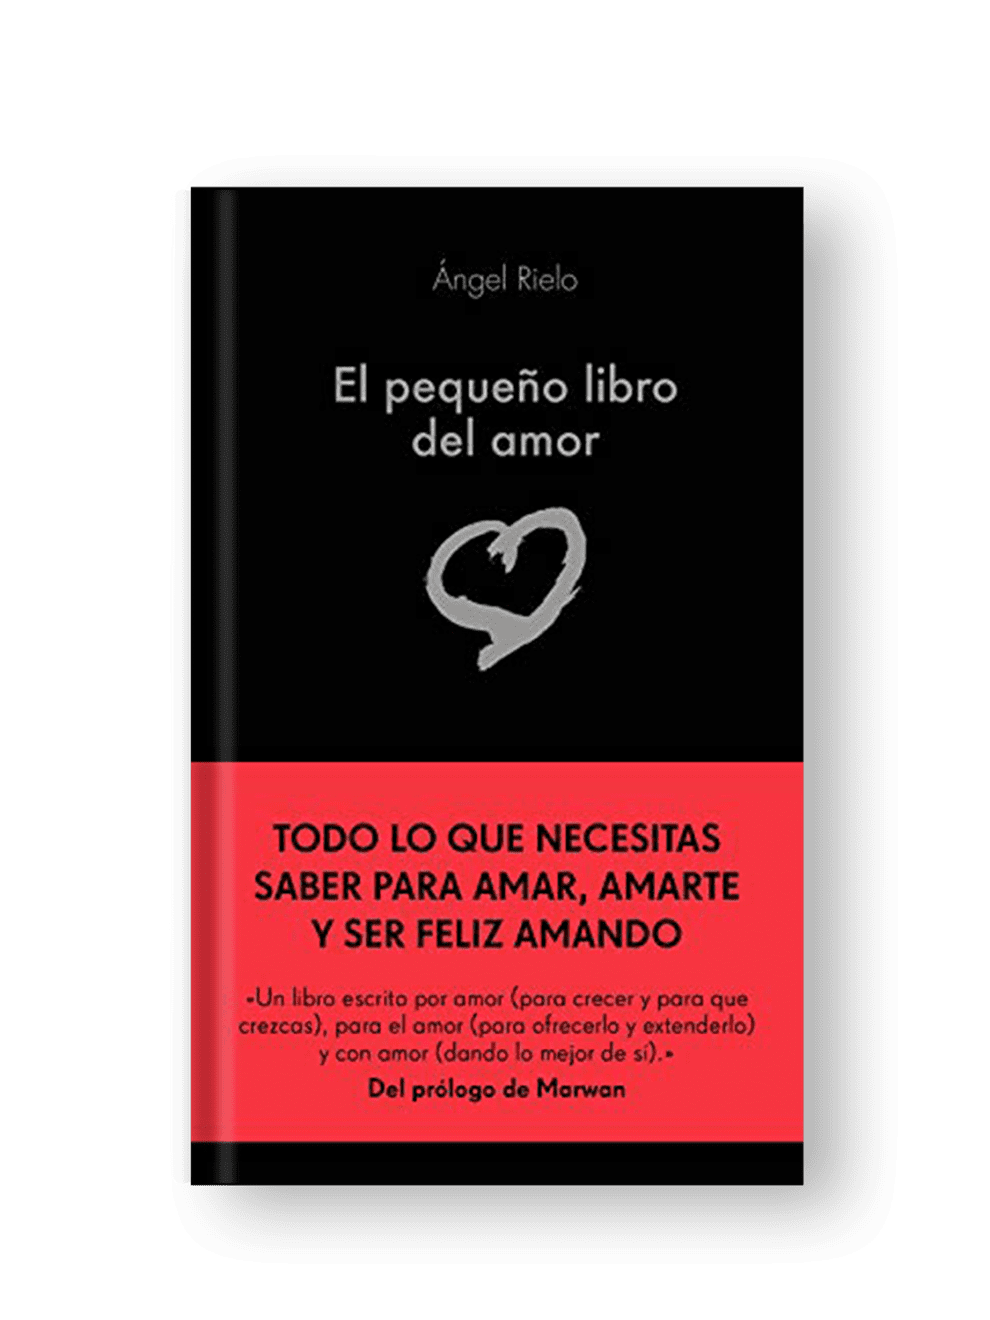 https://www.angelrielo.com/wp-content/uploads/2021/11/PEQUENO-LIBRO-AMOR-990x1320.png